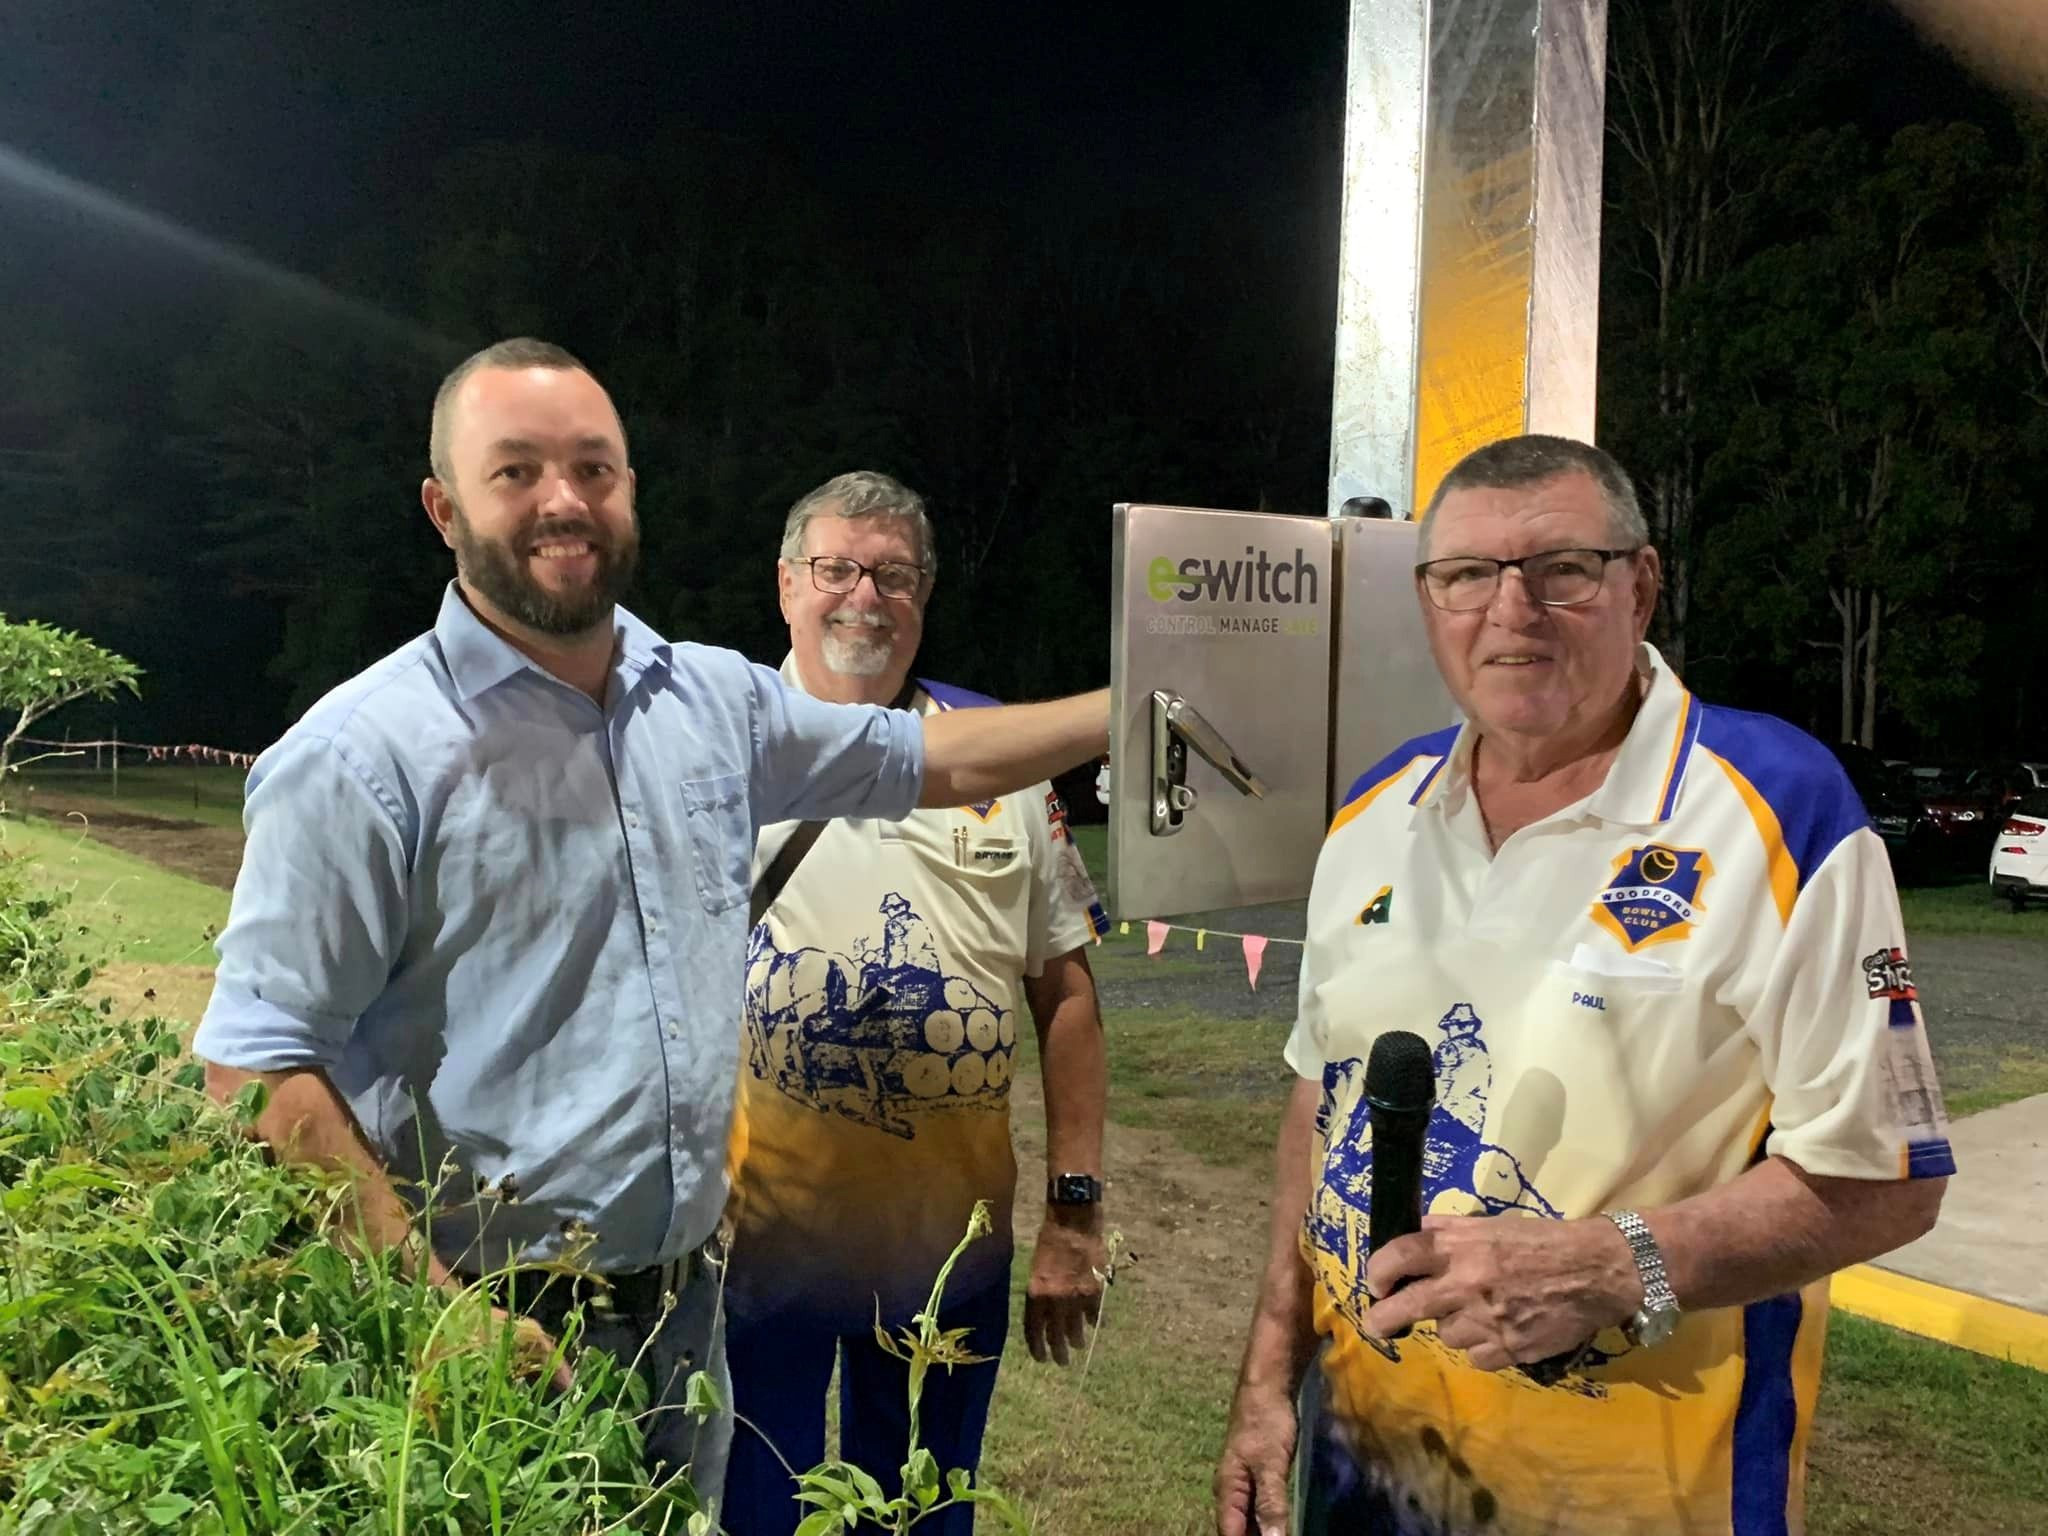 Tony Latter (far left) had the honour of switching on the new floodlights at the Woodford Bowls Club.